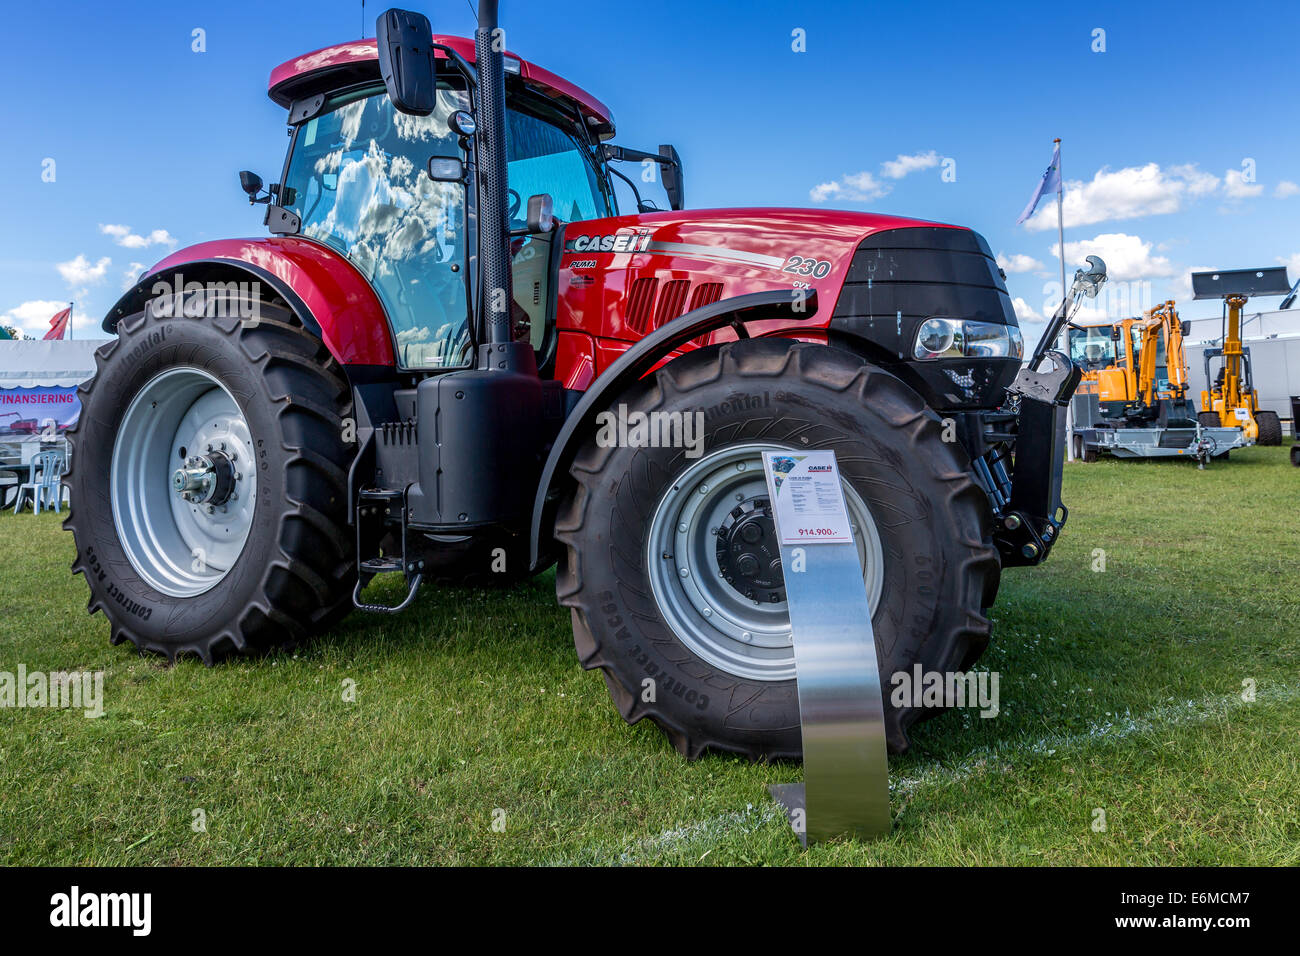 Display of agricultural equipment, Agricultural show, Case IH Puma  tractor, Funen Agricultural show, Odense, Denmark Stock Photo